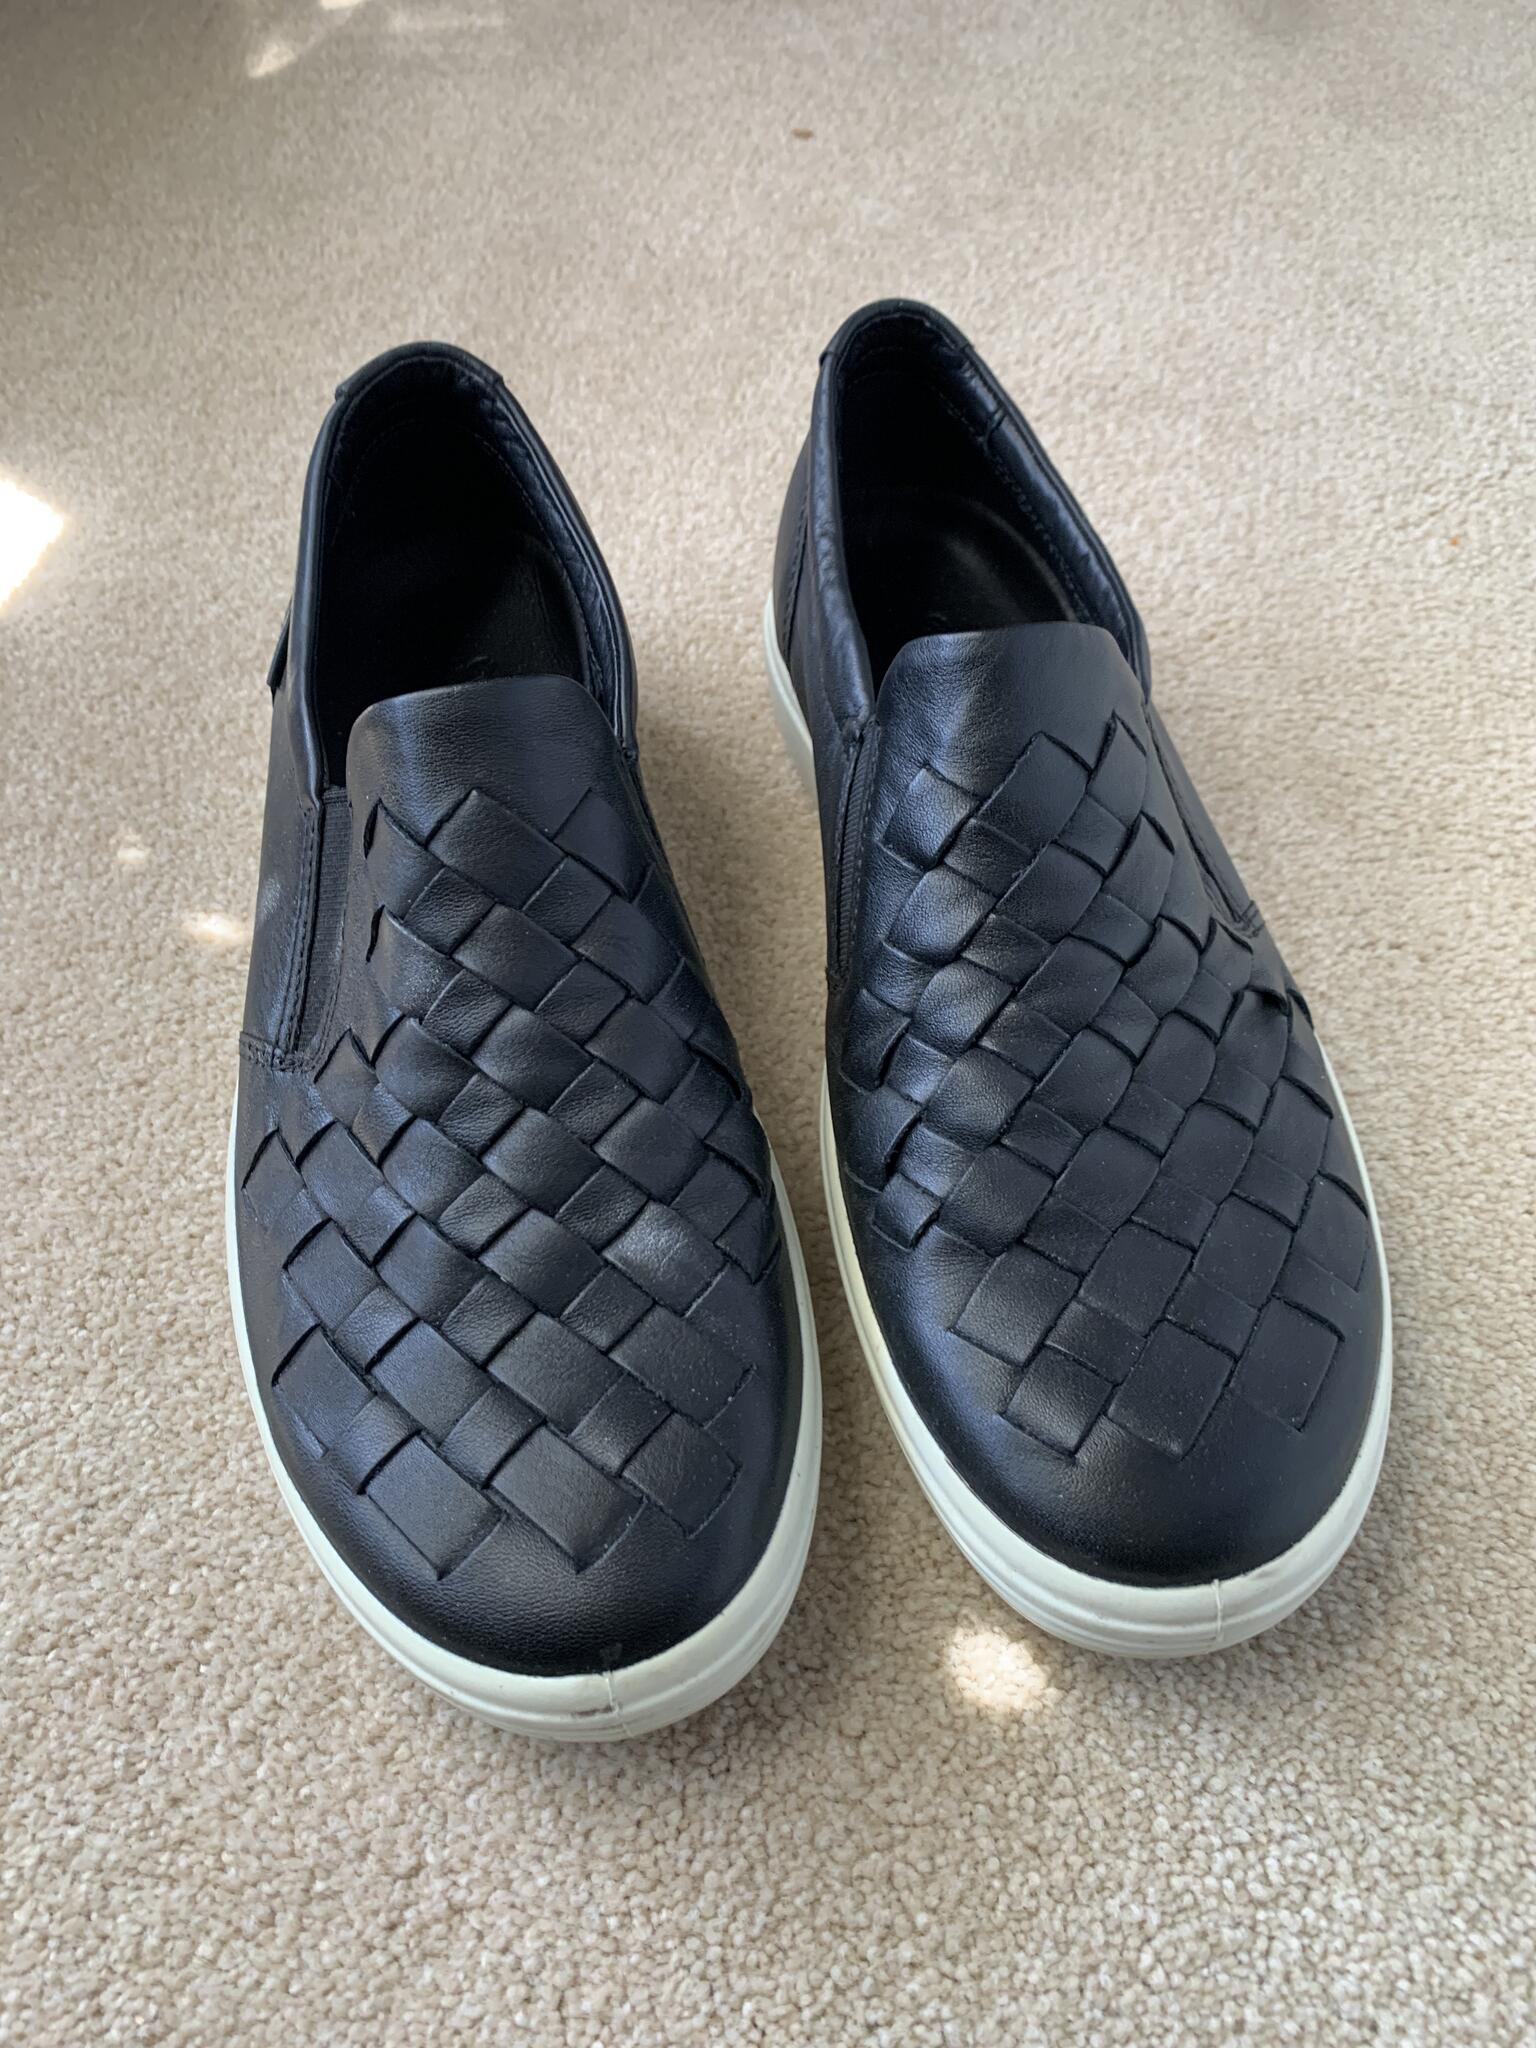 ECCO Soft Woven Slip-On Sneaker size 9 for $50 in Plano, TX | For Sale ...